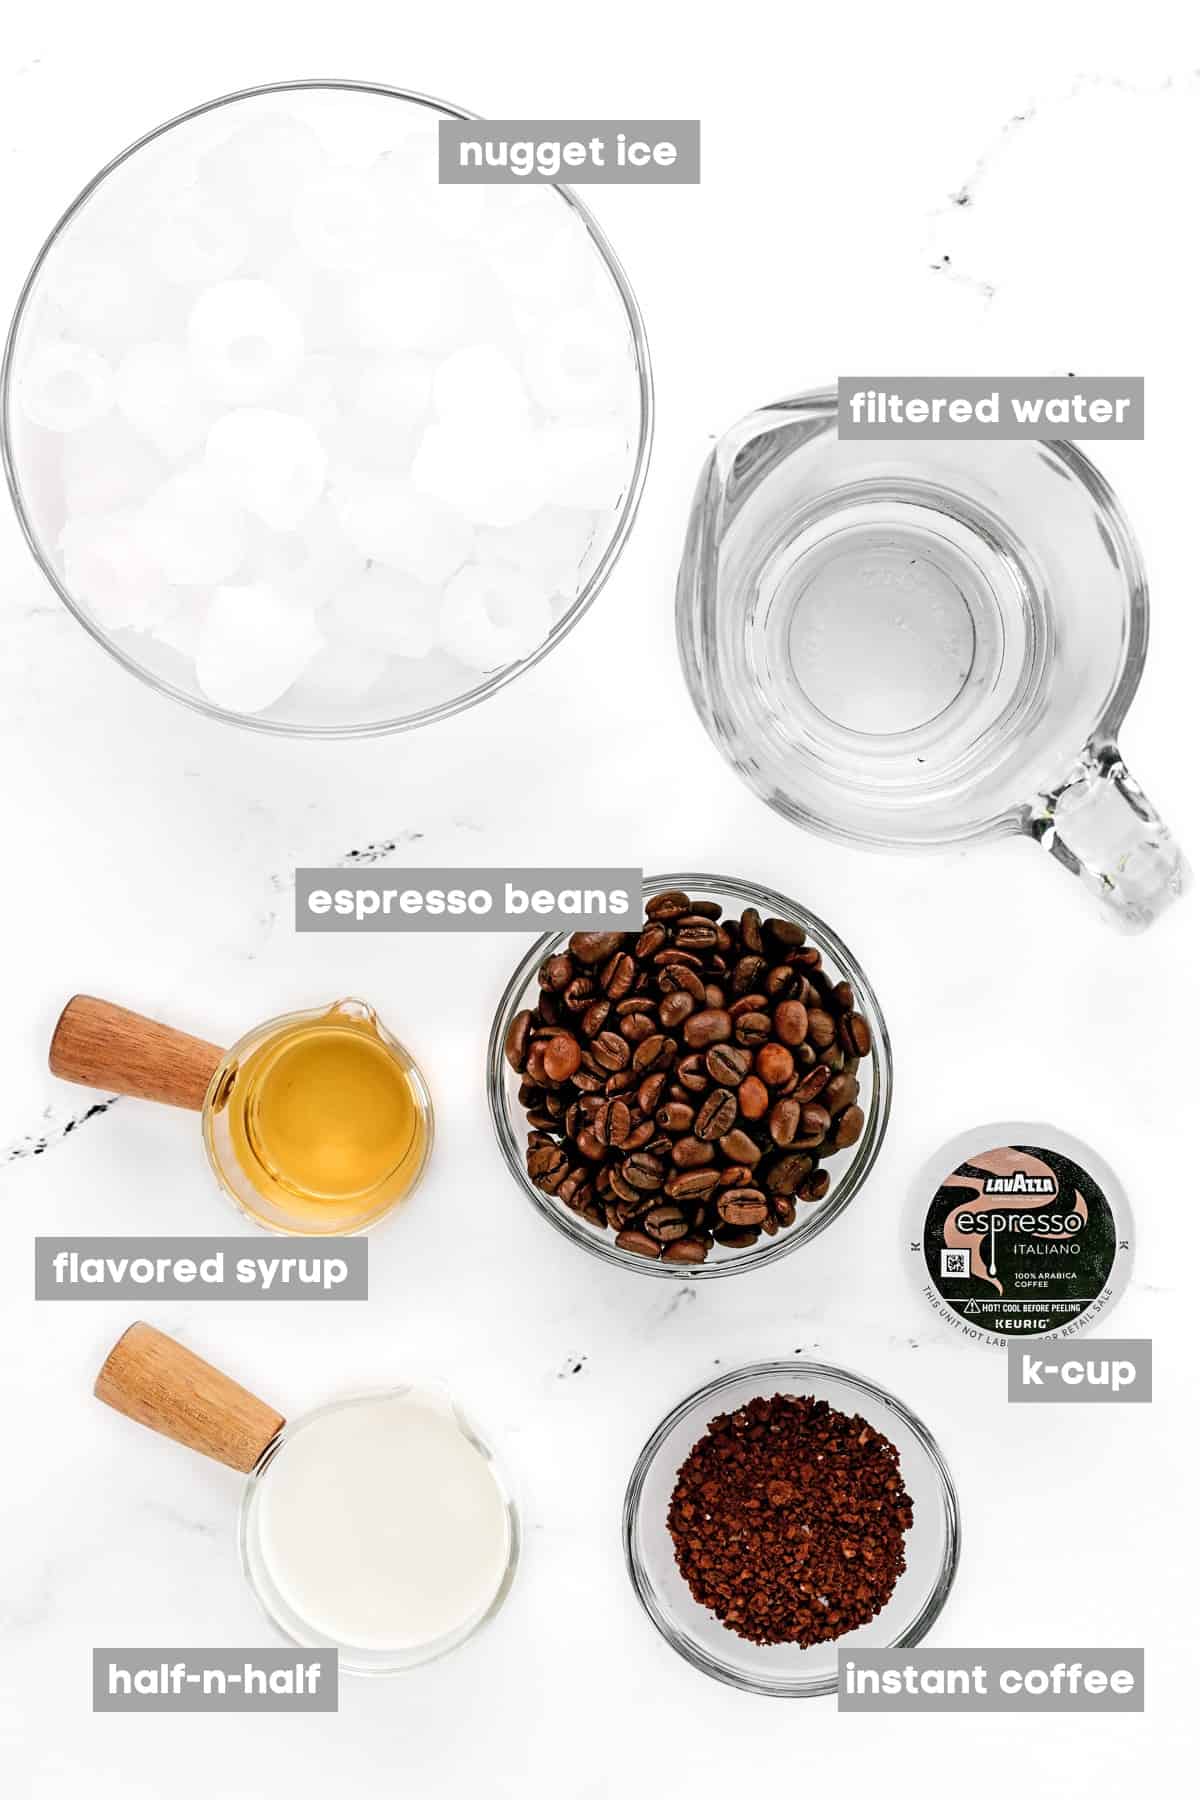 https://www.thegunnysack.com/wp-content/uploads/2012/08/Ingredients-For-Iced-Coffee.jpg